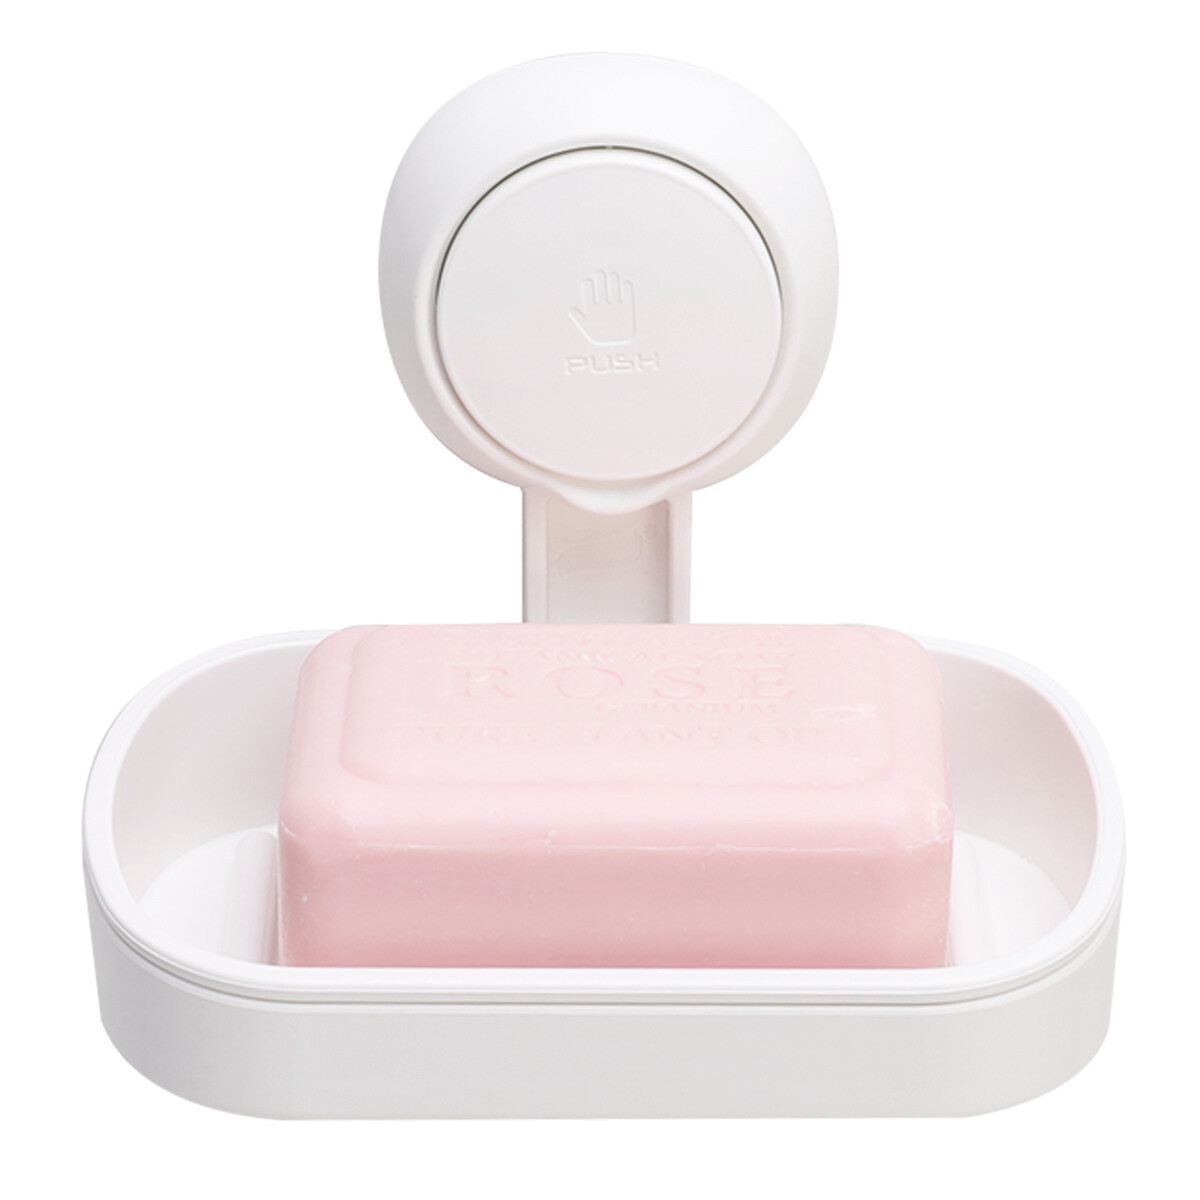 MYKE Suction Cup Soap Holder